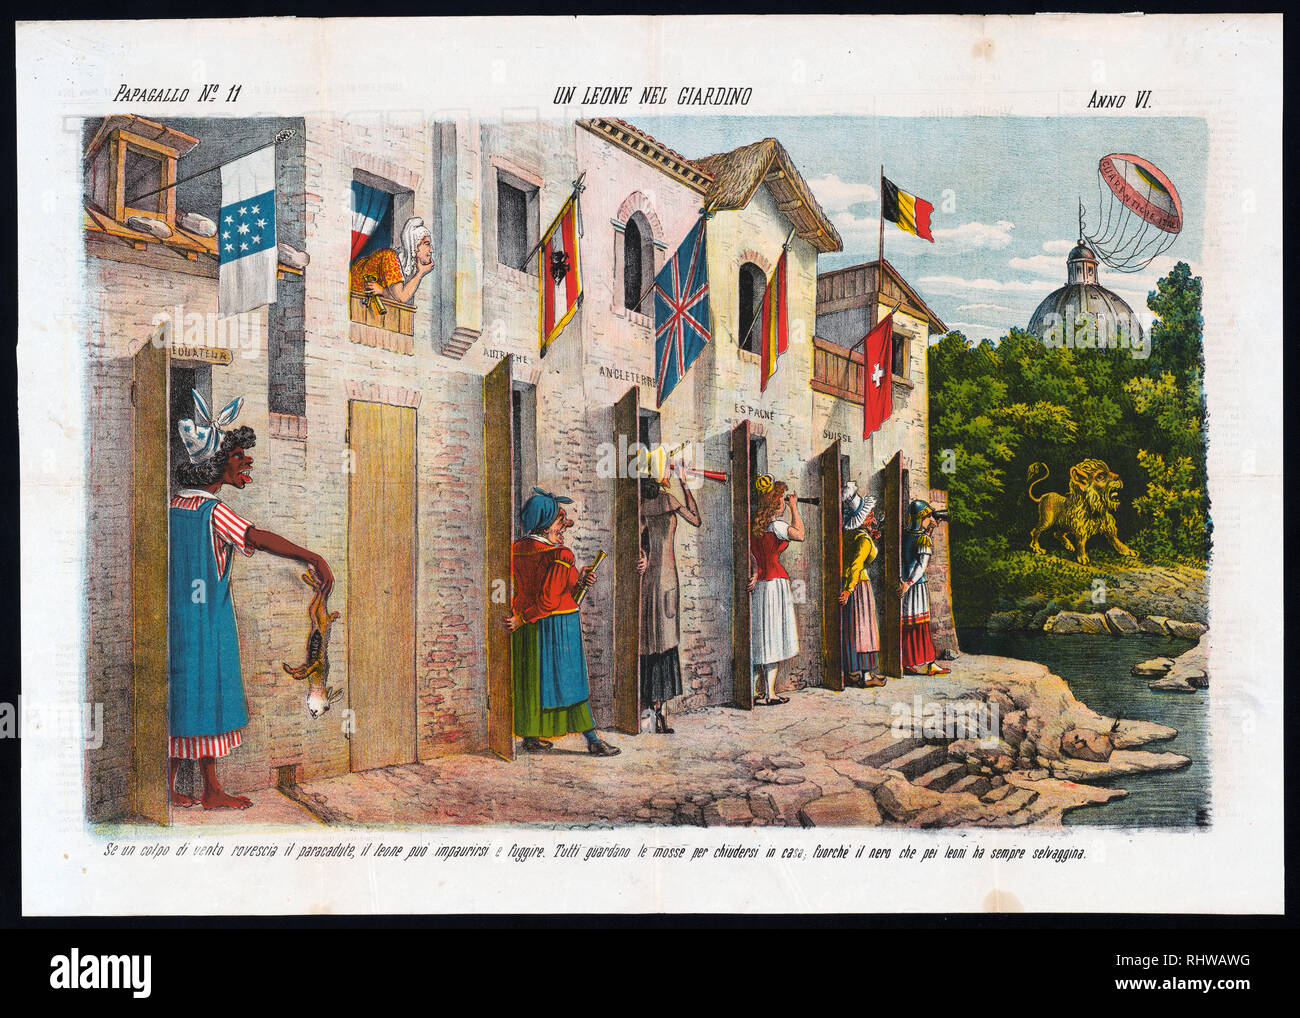 Italian political cartoon shows a large building extending from left to right center, with many doors labeled 'Equateur', [France], 'Autriche', 'Angleterre', 'Espagne', 'Suisse', and 'Belgio'; flags for each country hang from upper storey windows or parapets, and standing at each open door is a woman representing that country, most are looking to the right through telescopes at the British Lion in a garden across a small channel of water. At the door labeled 'Equateur' is an unconcerned black woman holding up a dead rabbit to offer the lion should it flee from the 'Cuarenticie Itali' parachute Stock Photo